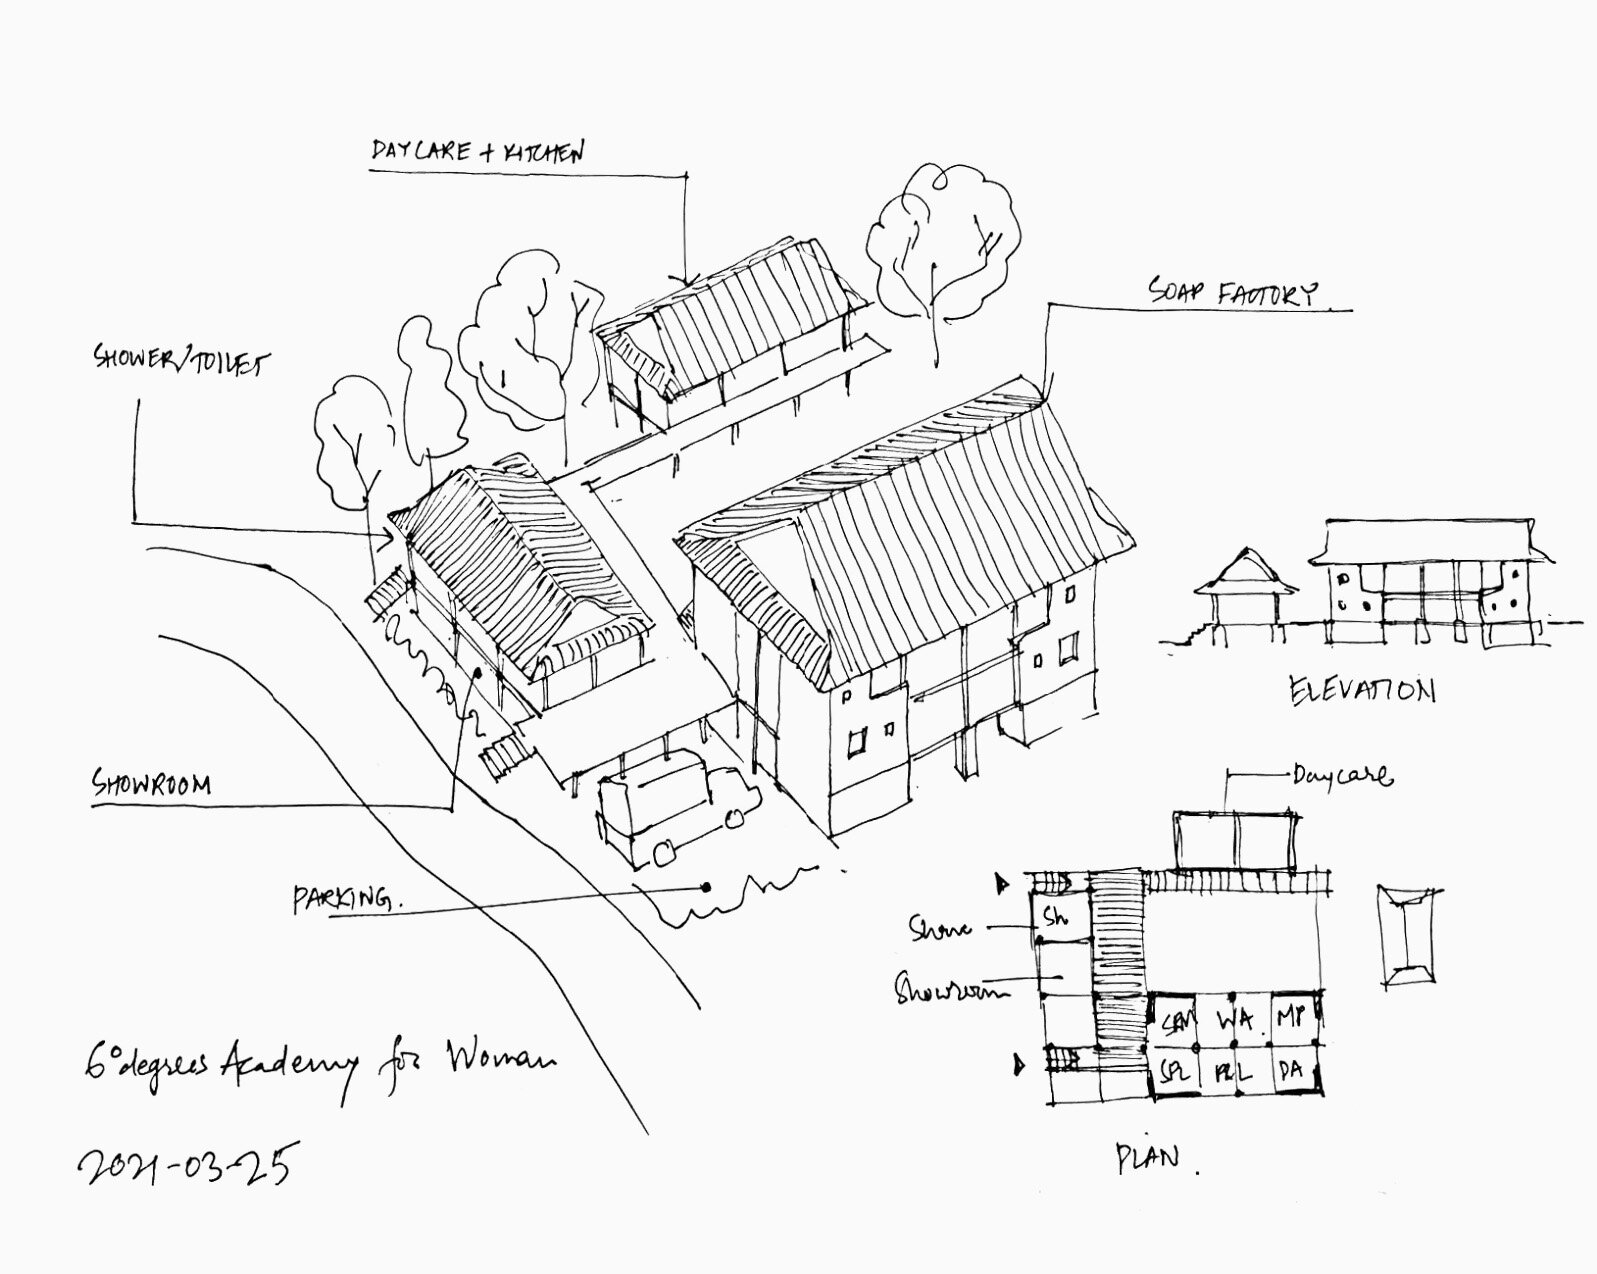 Initial master plan drawing of the eco village by Baha Spatial Agency